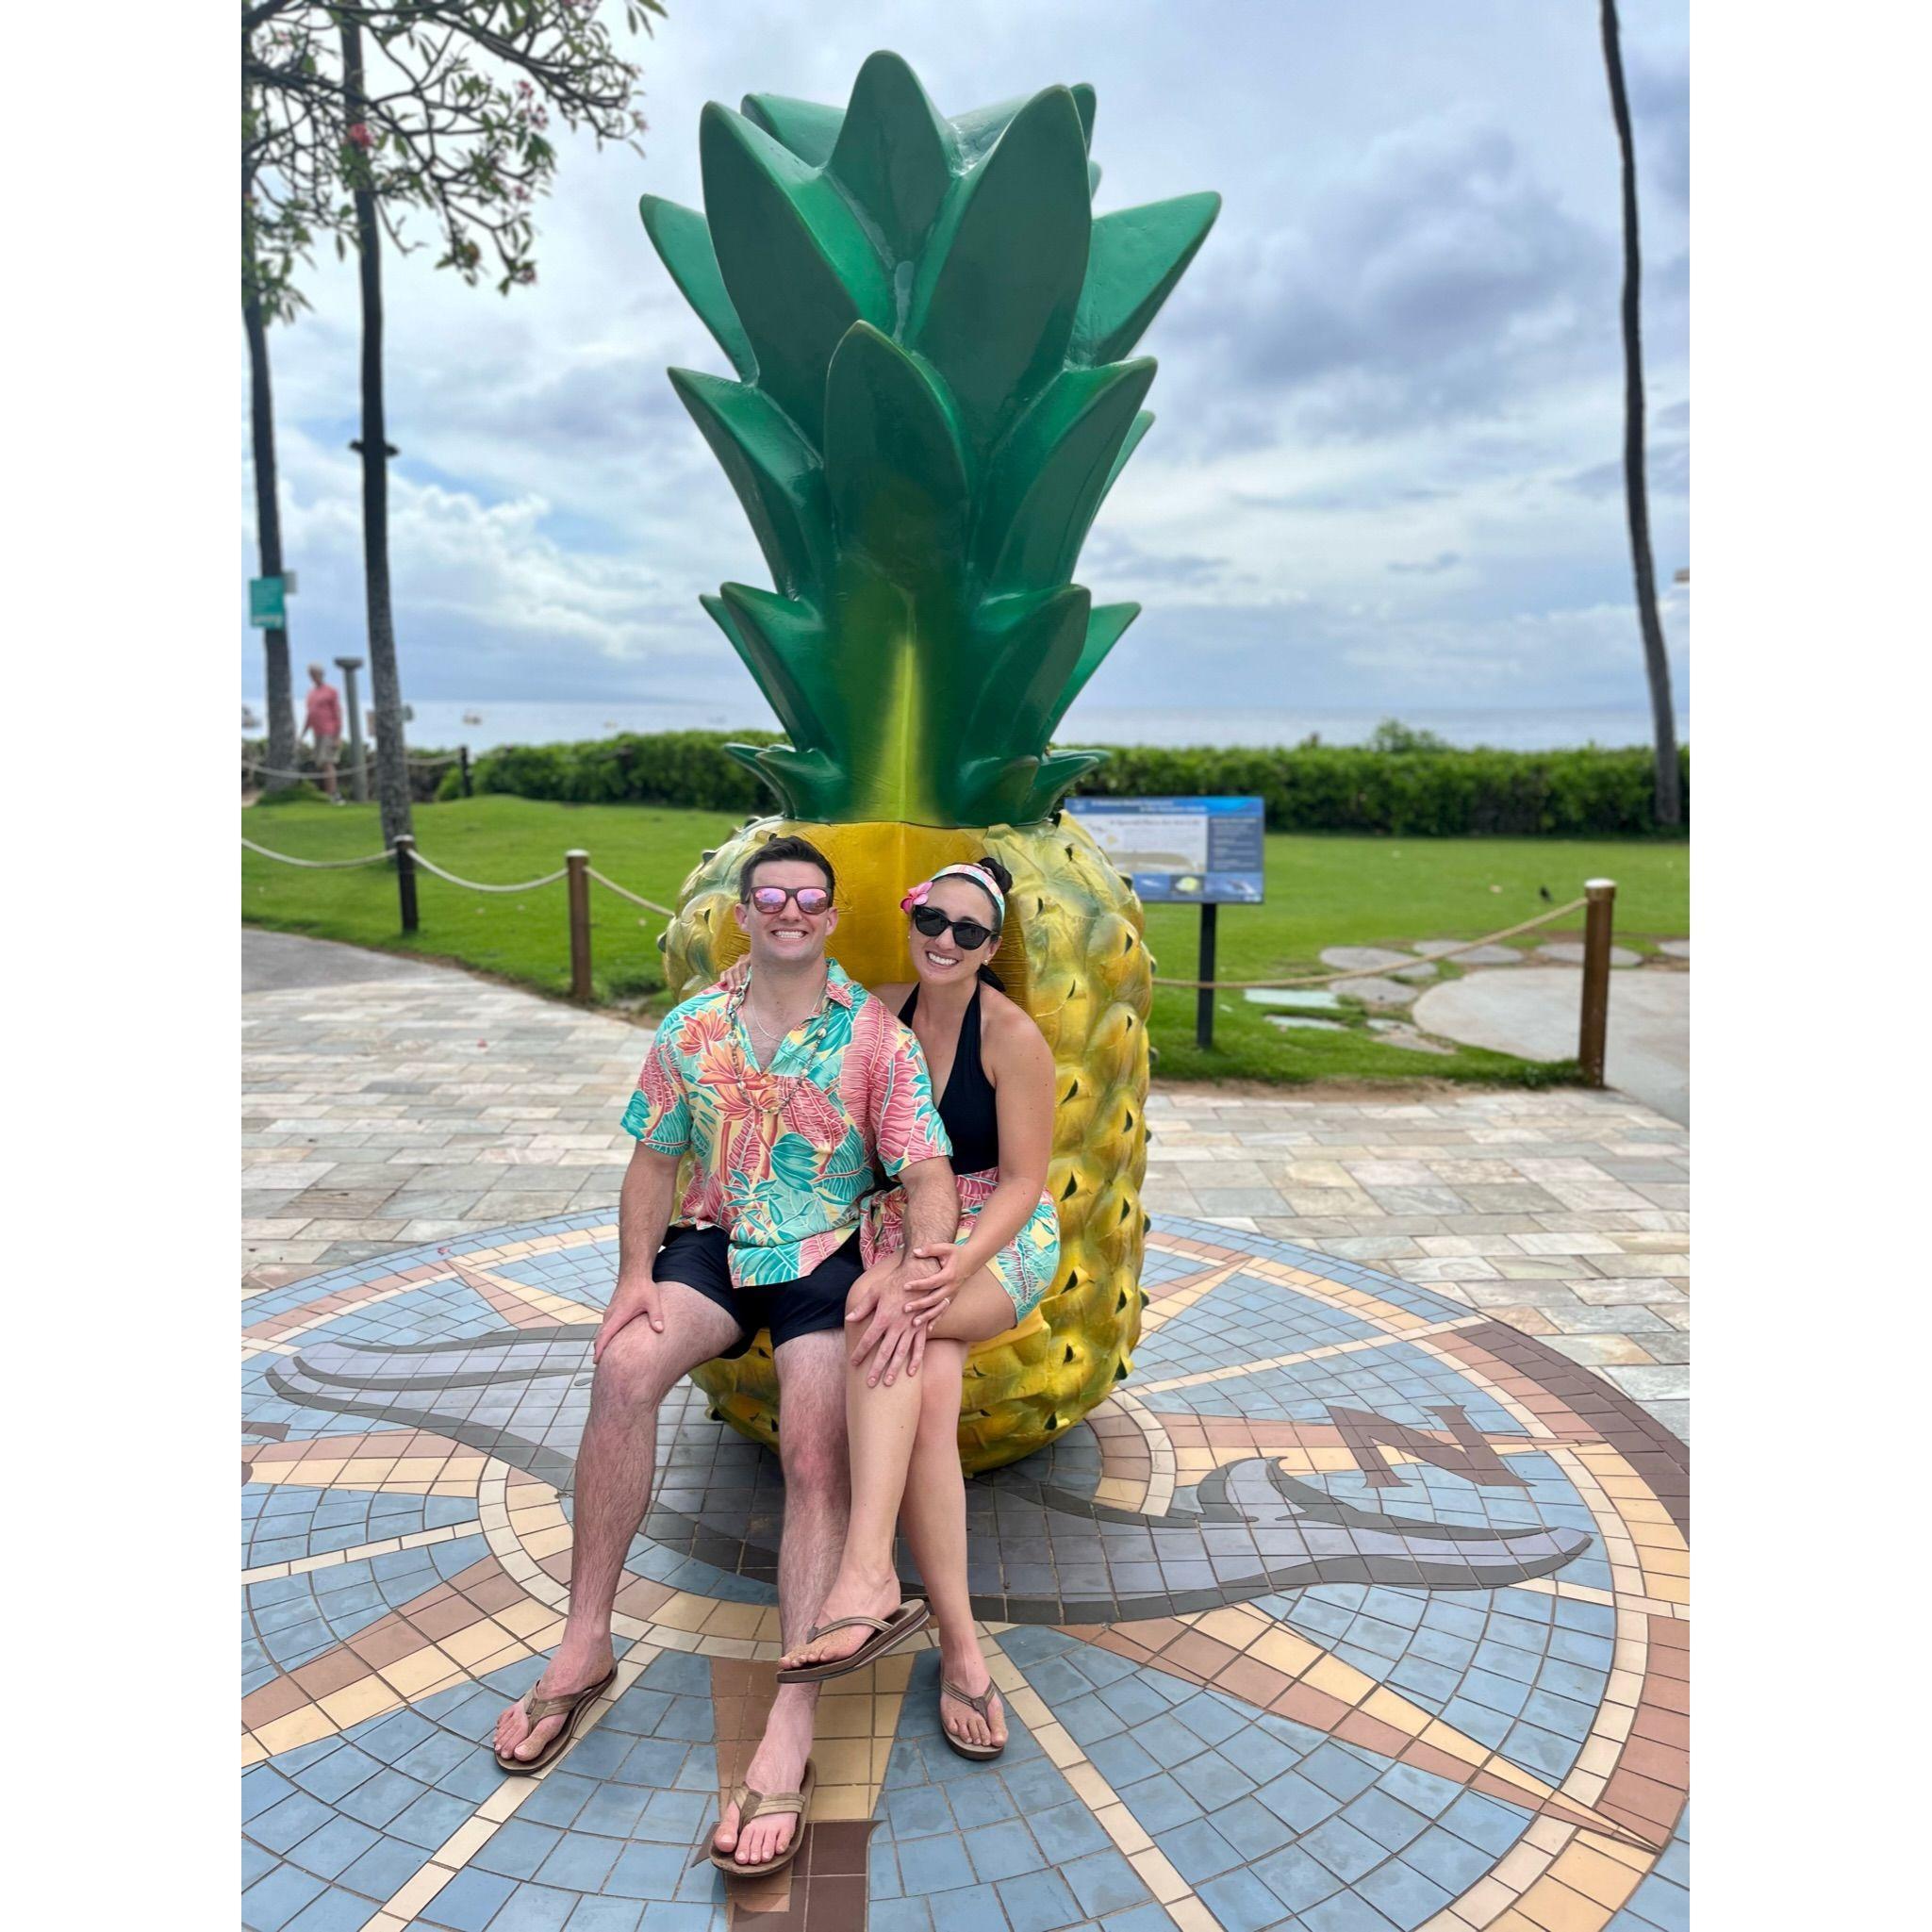 Matching outfits on a pineapple.